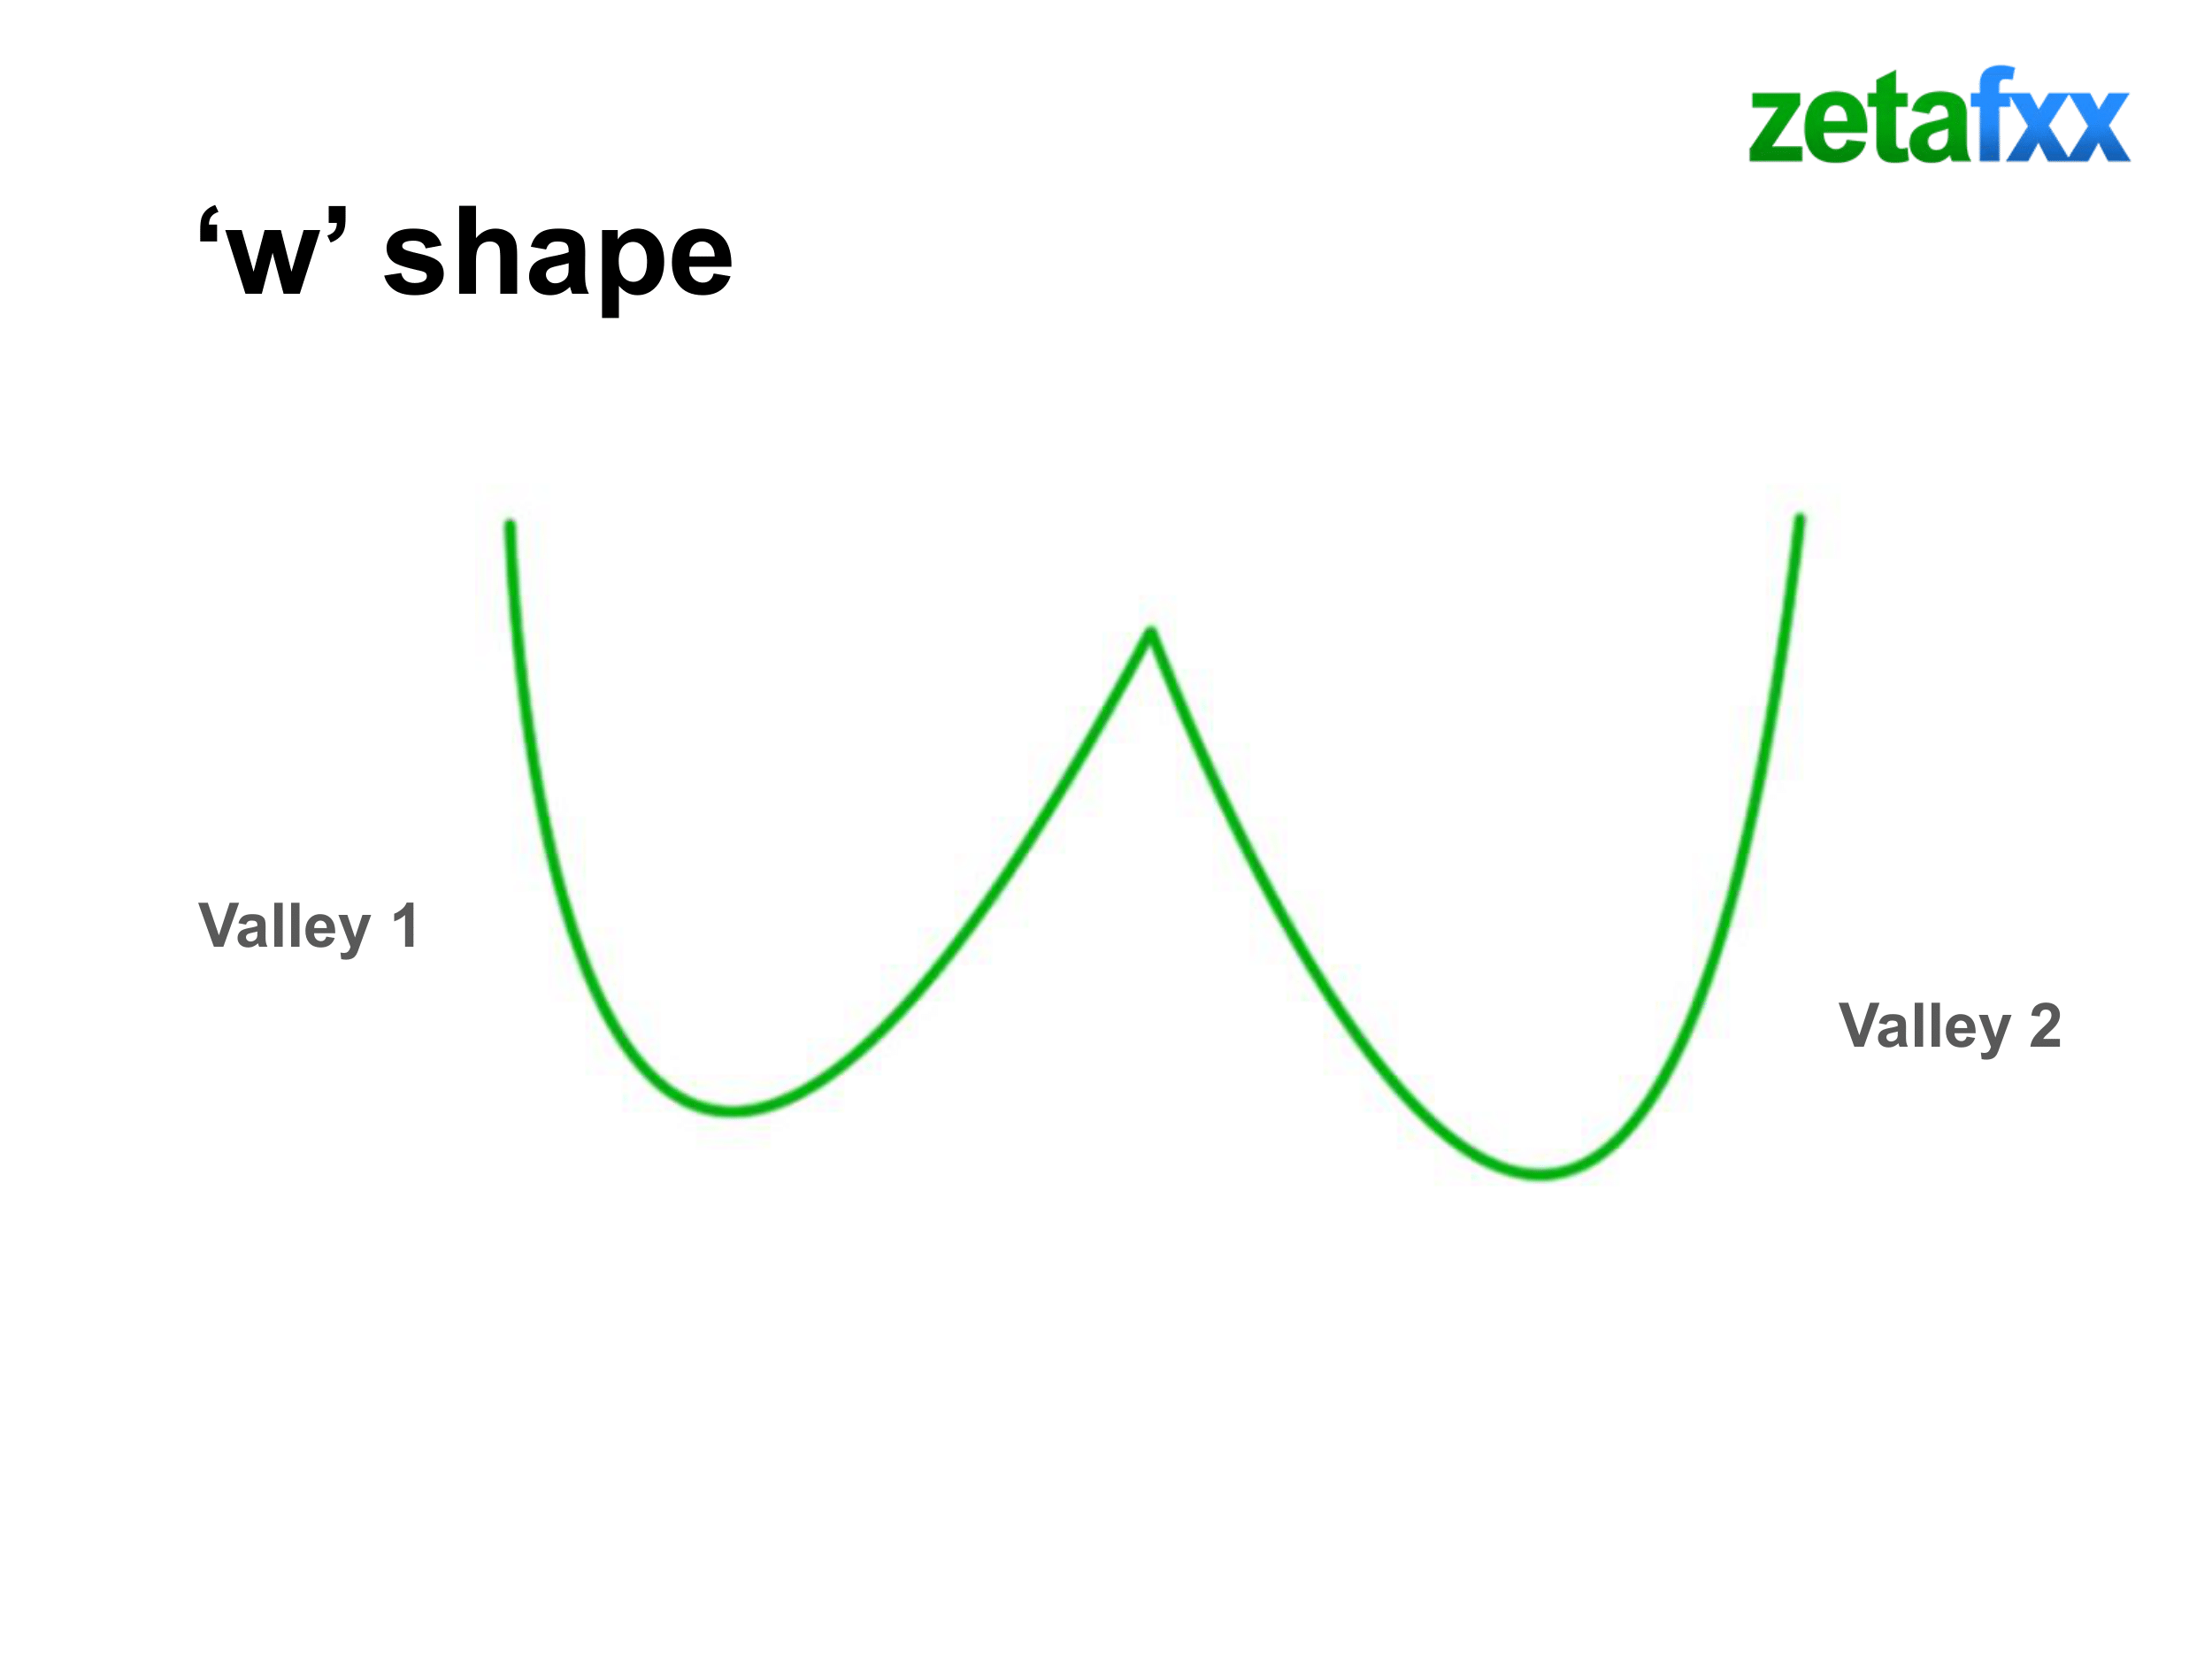 Trading breakout strategy buy setup - requires a 'w' shape in the form of 2 valleys.